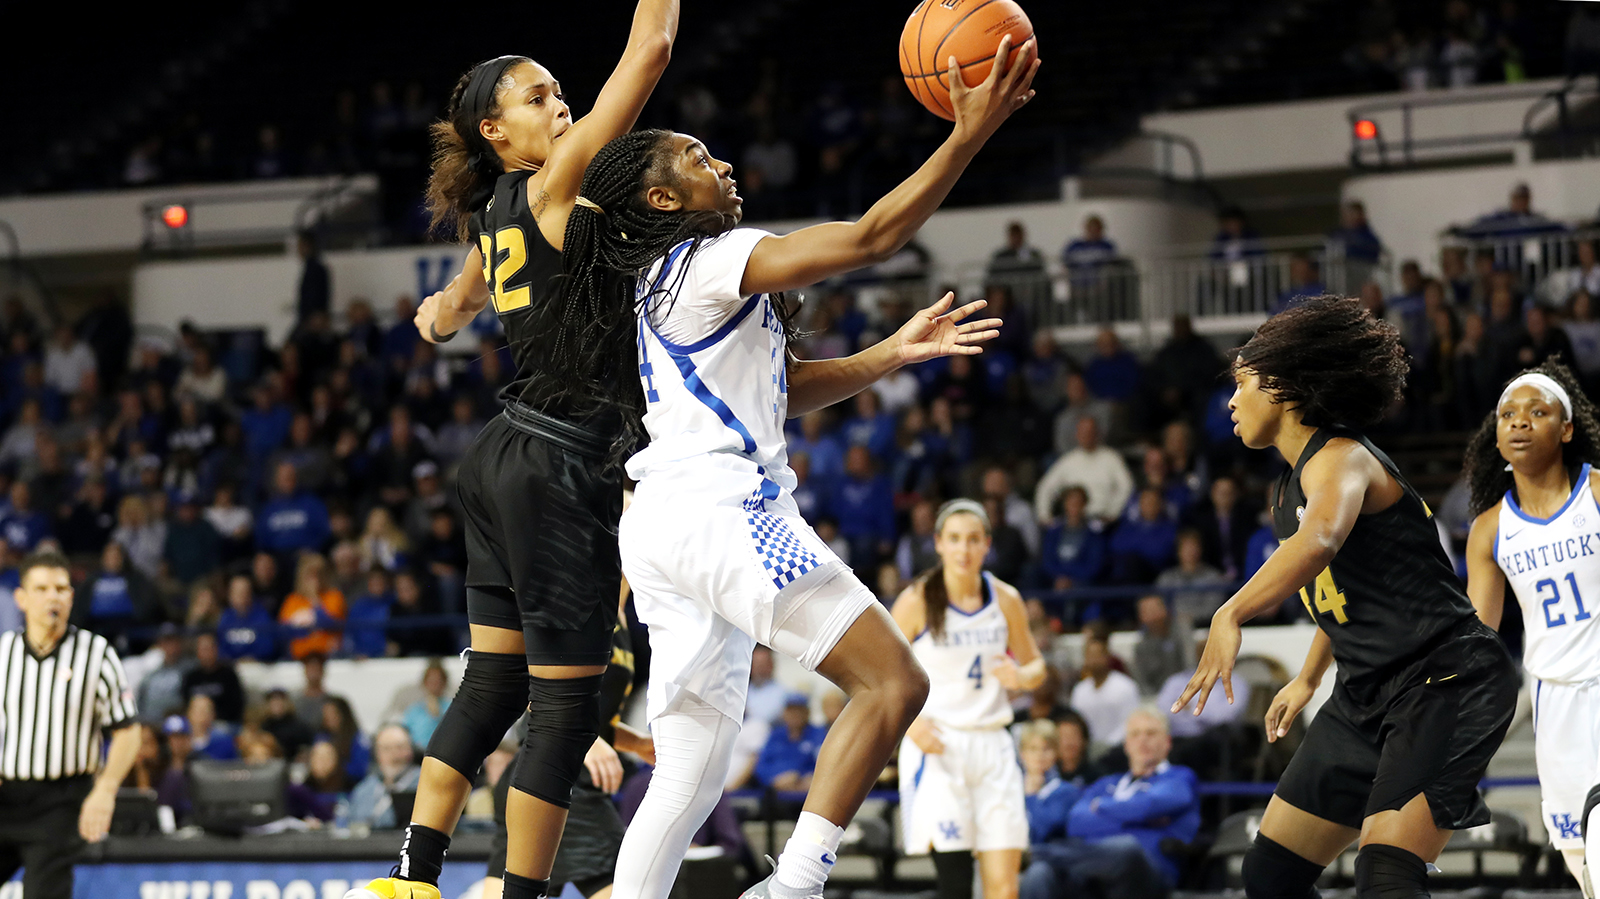 Murray Leads No. 15 Kentucky in Gritty Win Over No. 25 Missouri